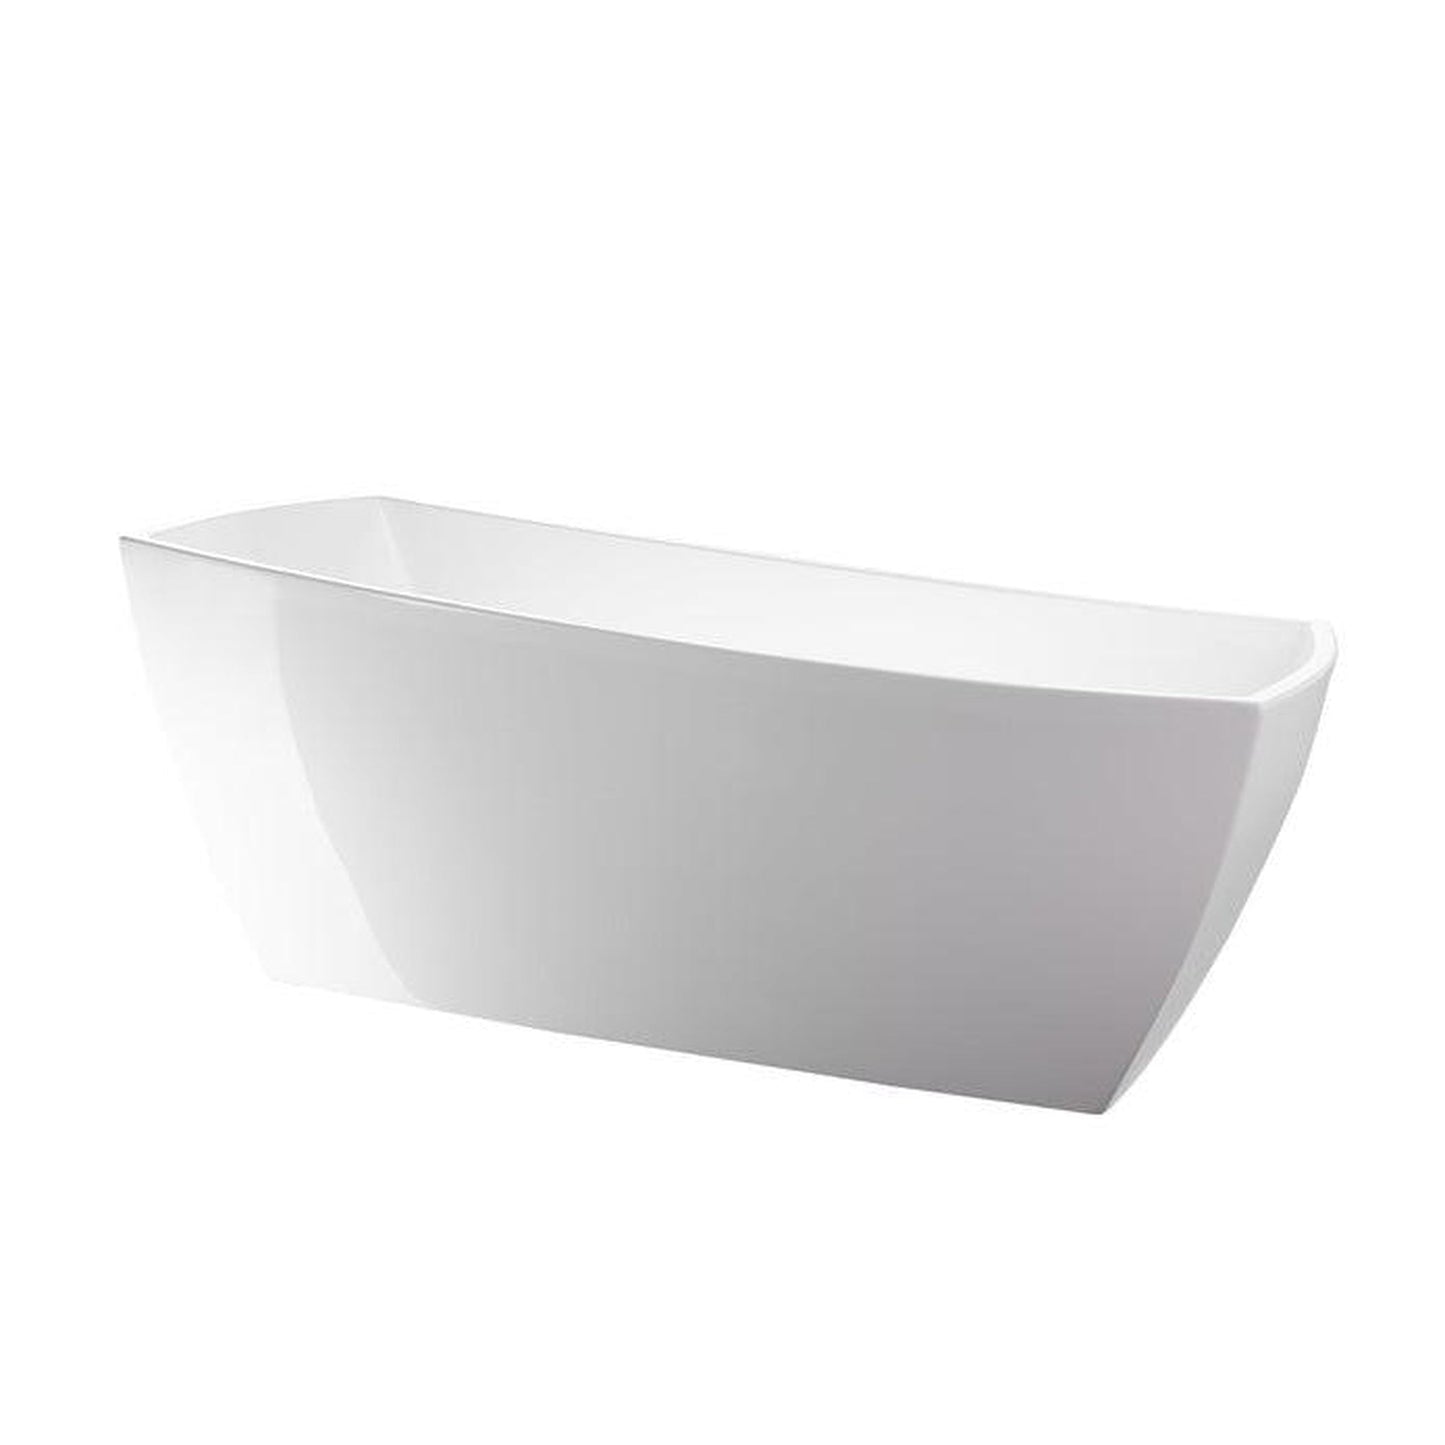 Vanity Art 67" White Acrylic Contemporary Design Soaking Tub With Overflow and Pop-up Drain